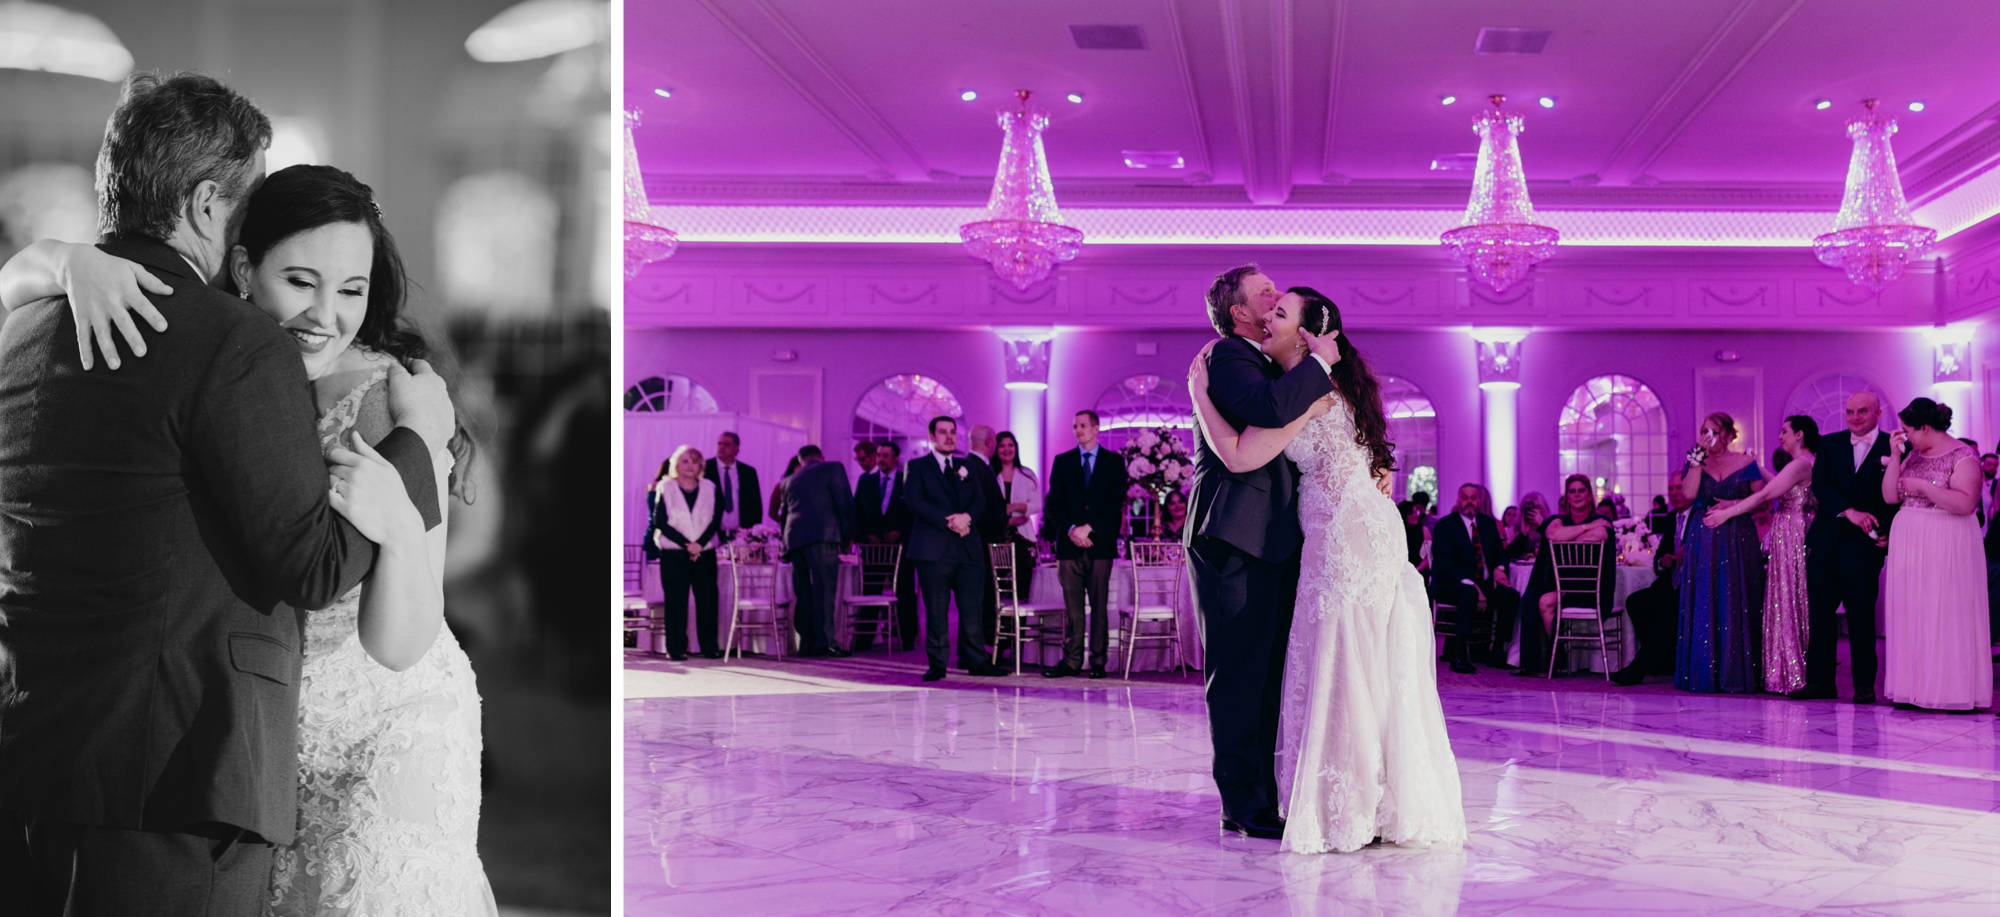 bride and her father dance during a wedding reception at valley regency in new jersey